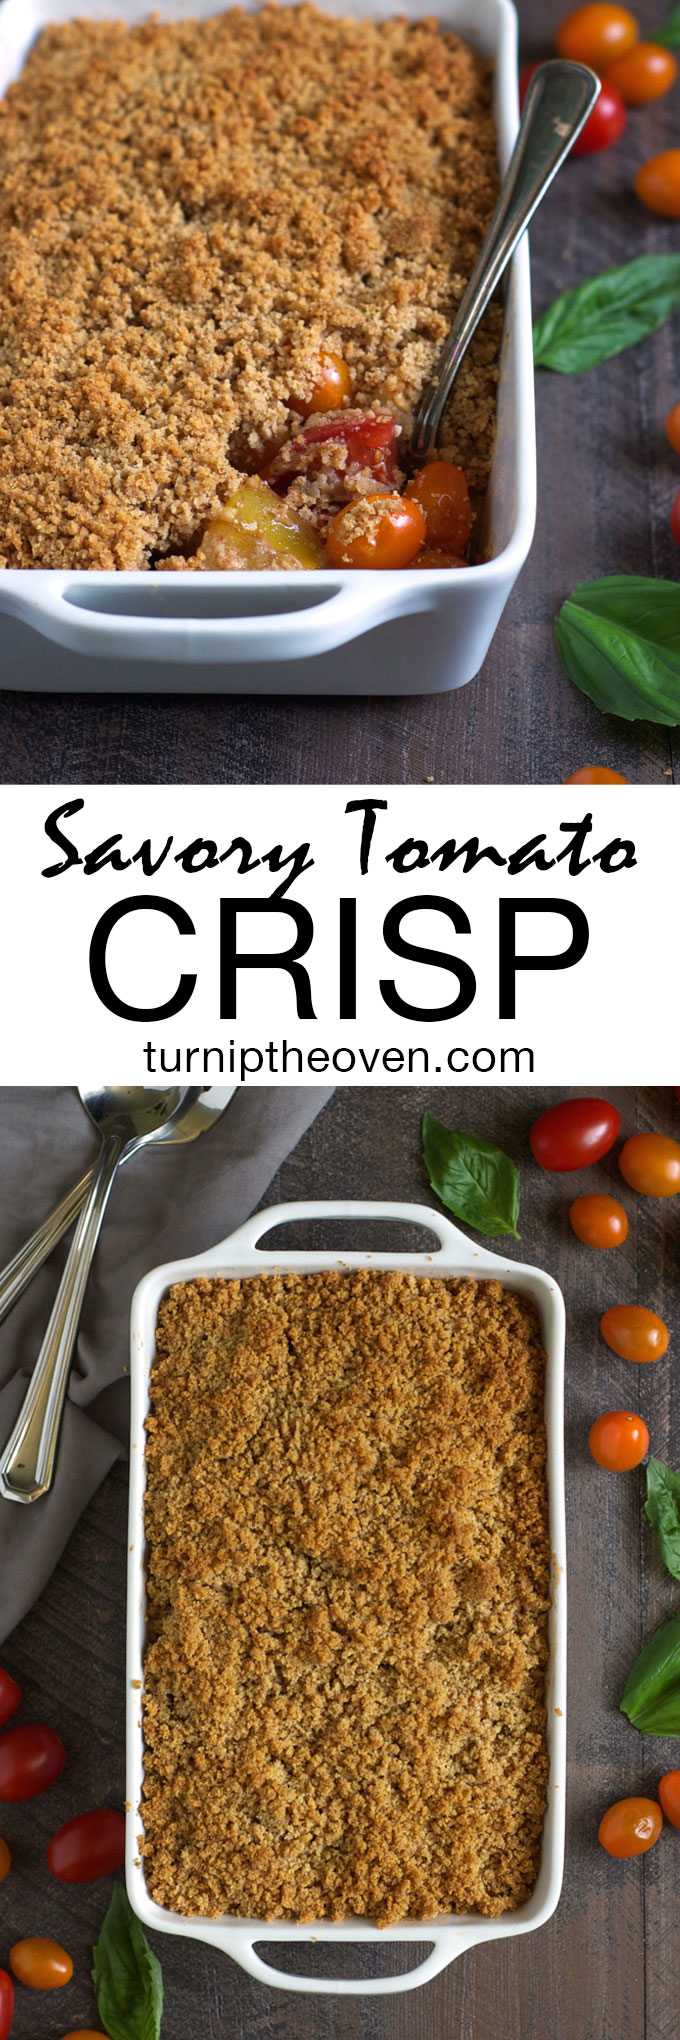 This savory tomato crisp is flavored with balsamic vinegar, fresh garlic, and loads of buttery cracker crumbles. It's the perfect easy, elegant, healthy vegetarian dish!